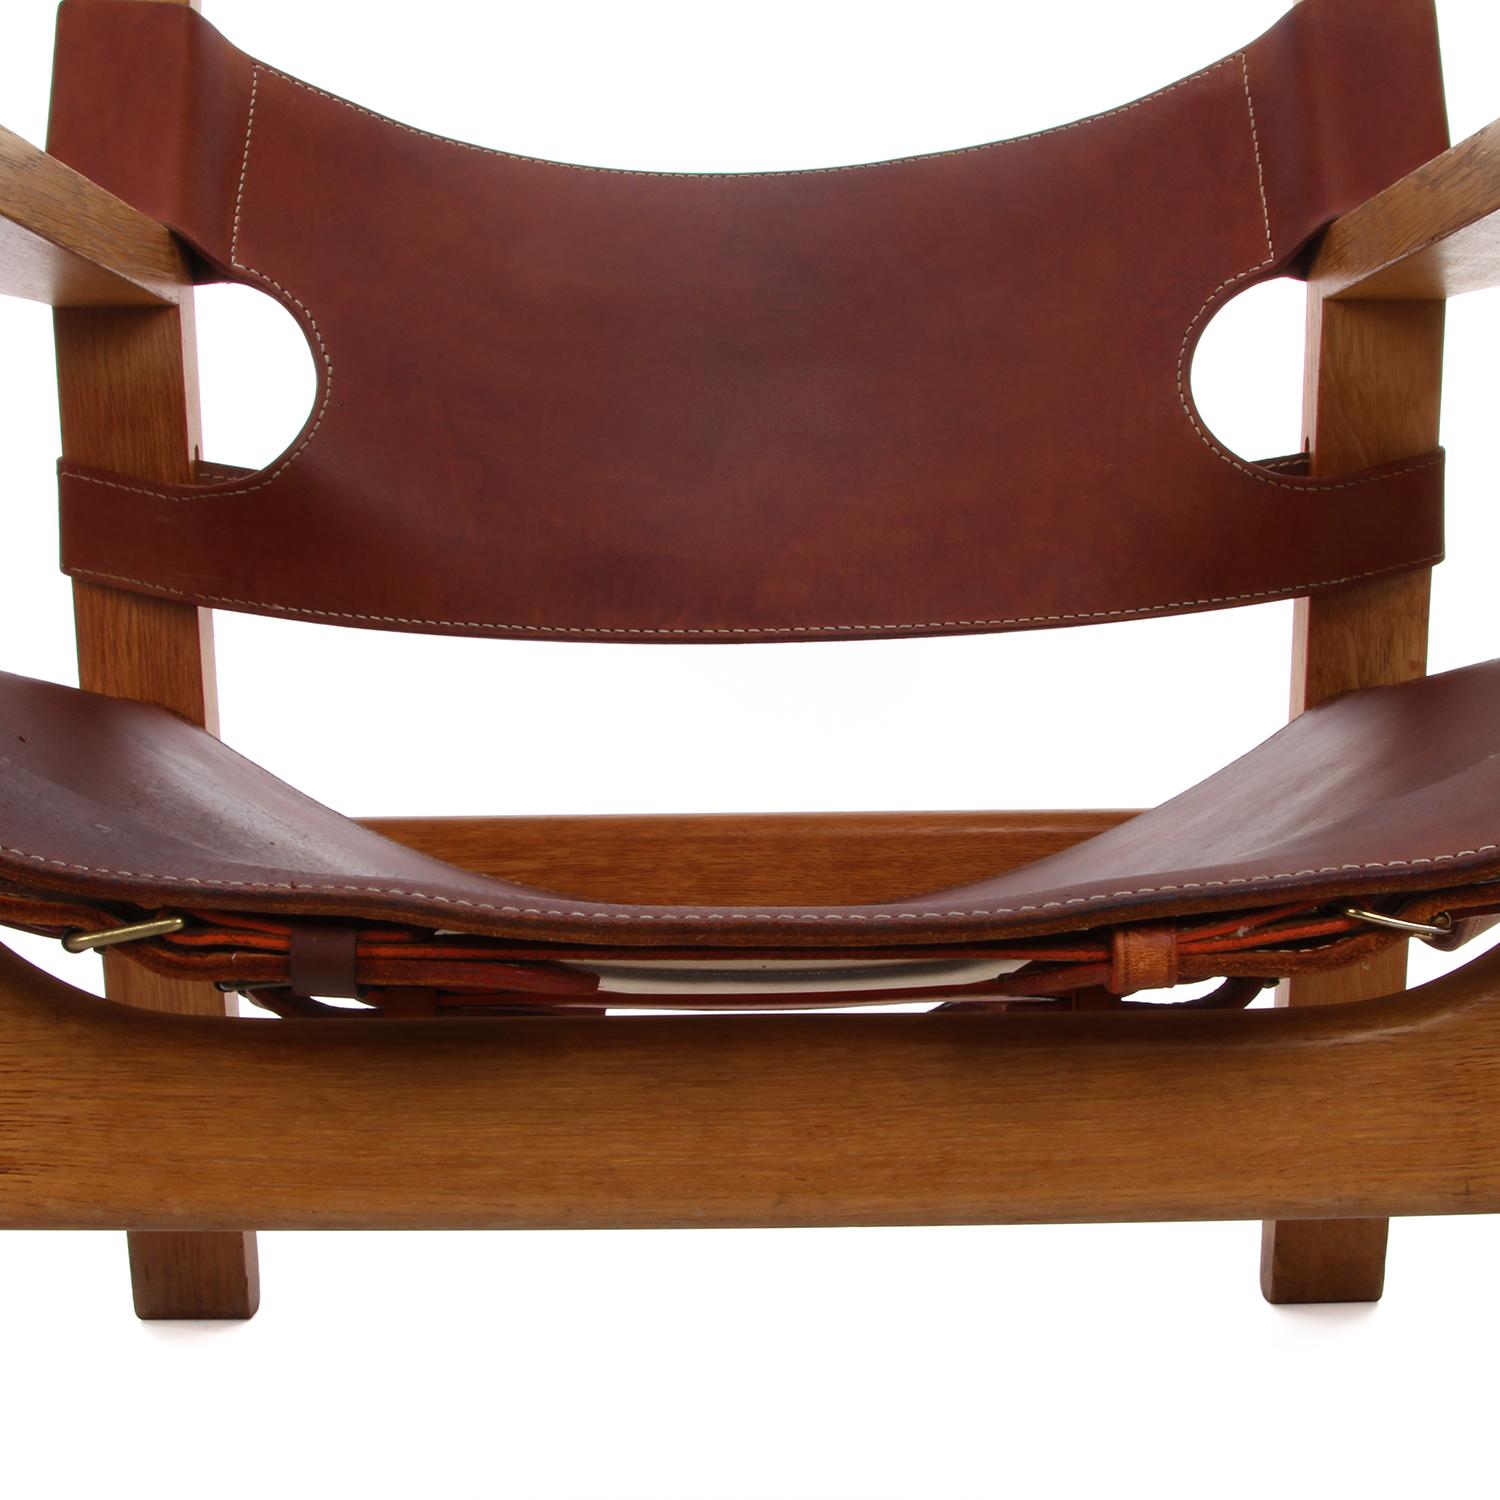 Mid-20th Century Spanish Chair by Borge Mogensen, Fredericia Furniture, 1958, Vintage Edition